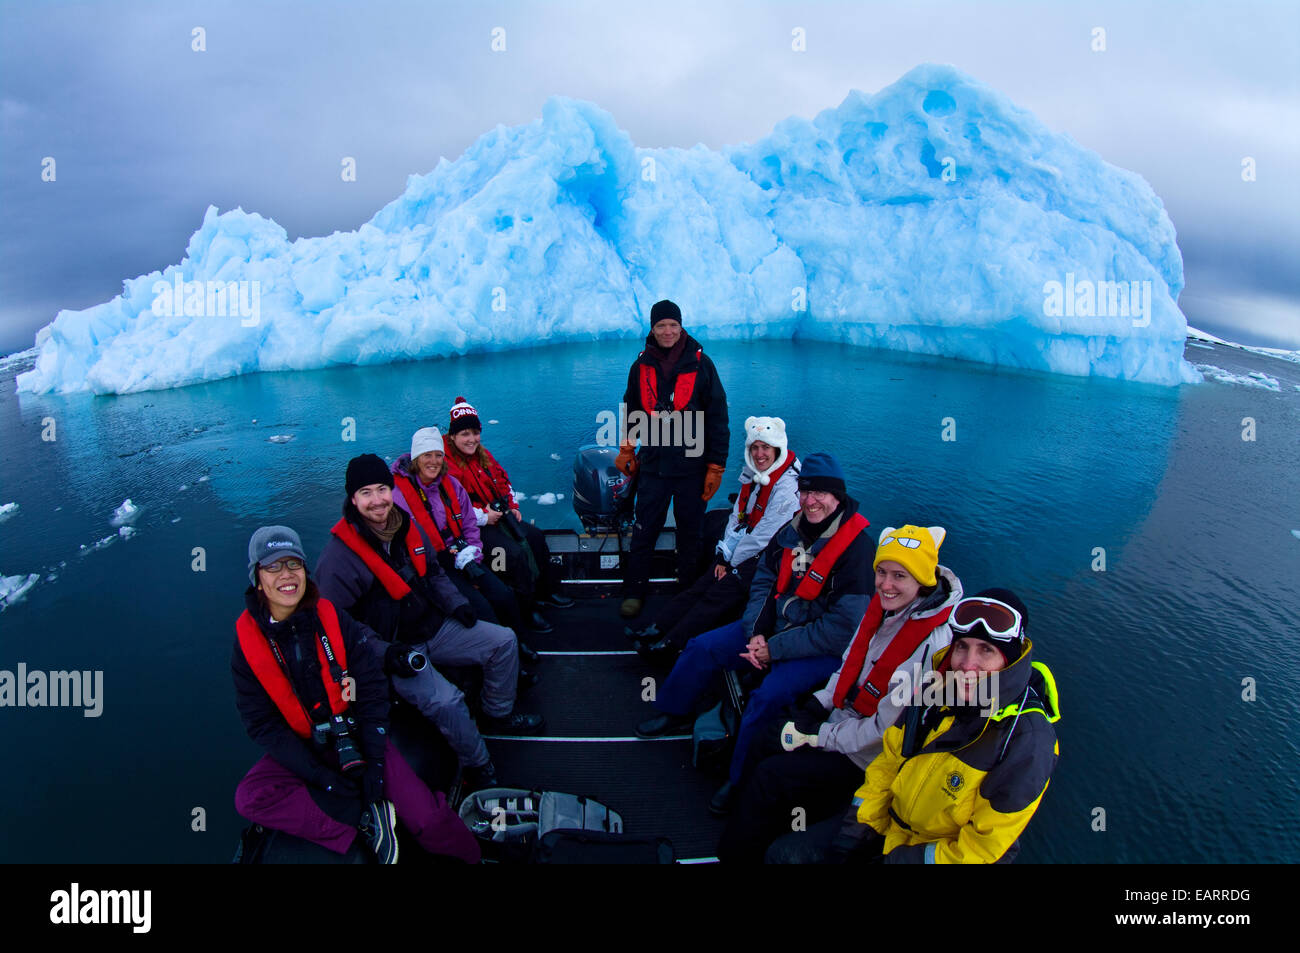 Tourists in a boat pose in front of a jagged blue Antarctic iceberg. Stock Photo